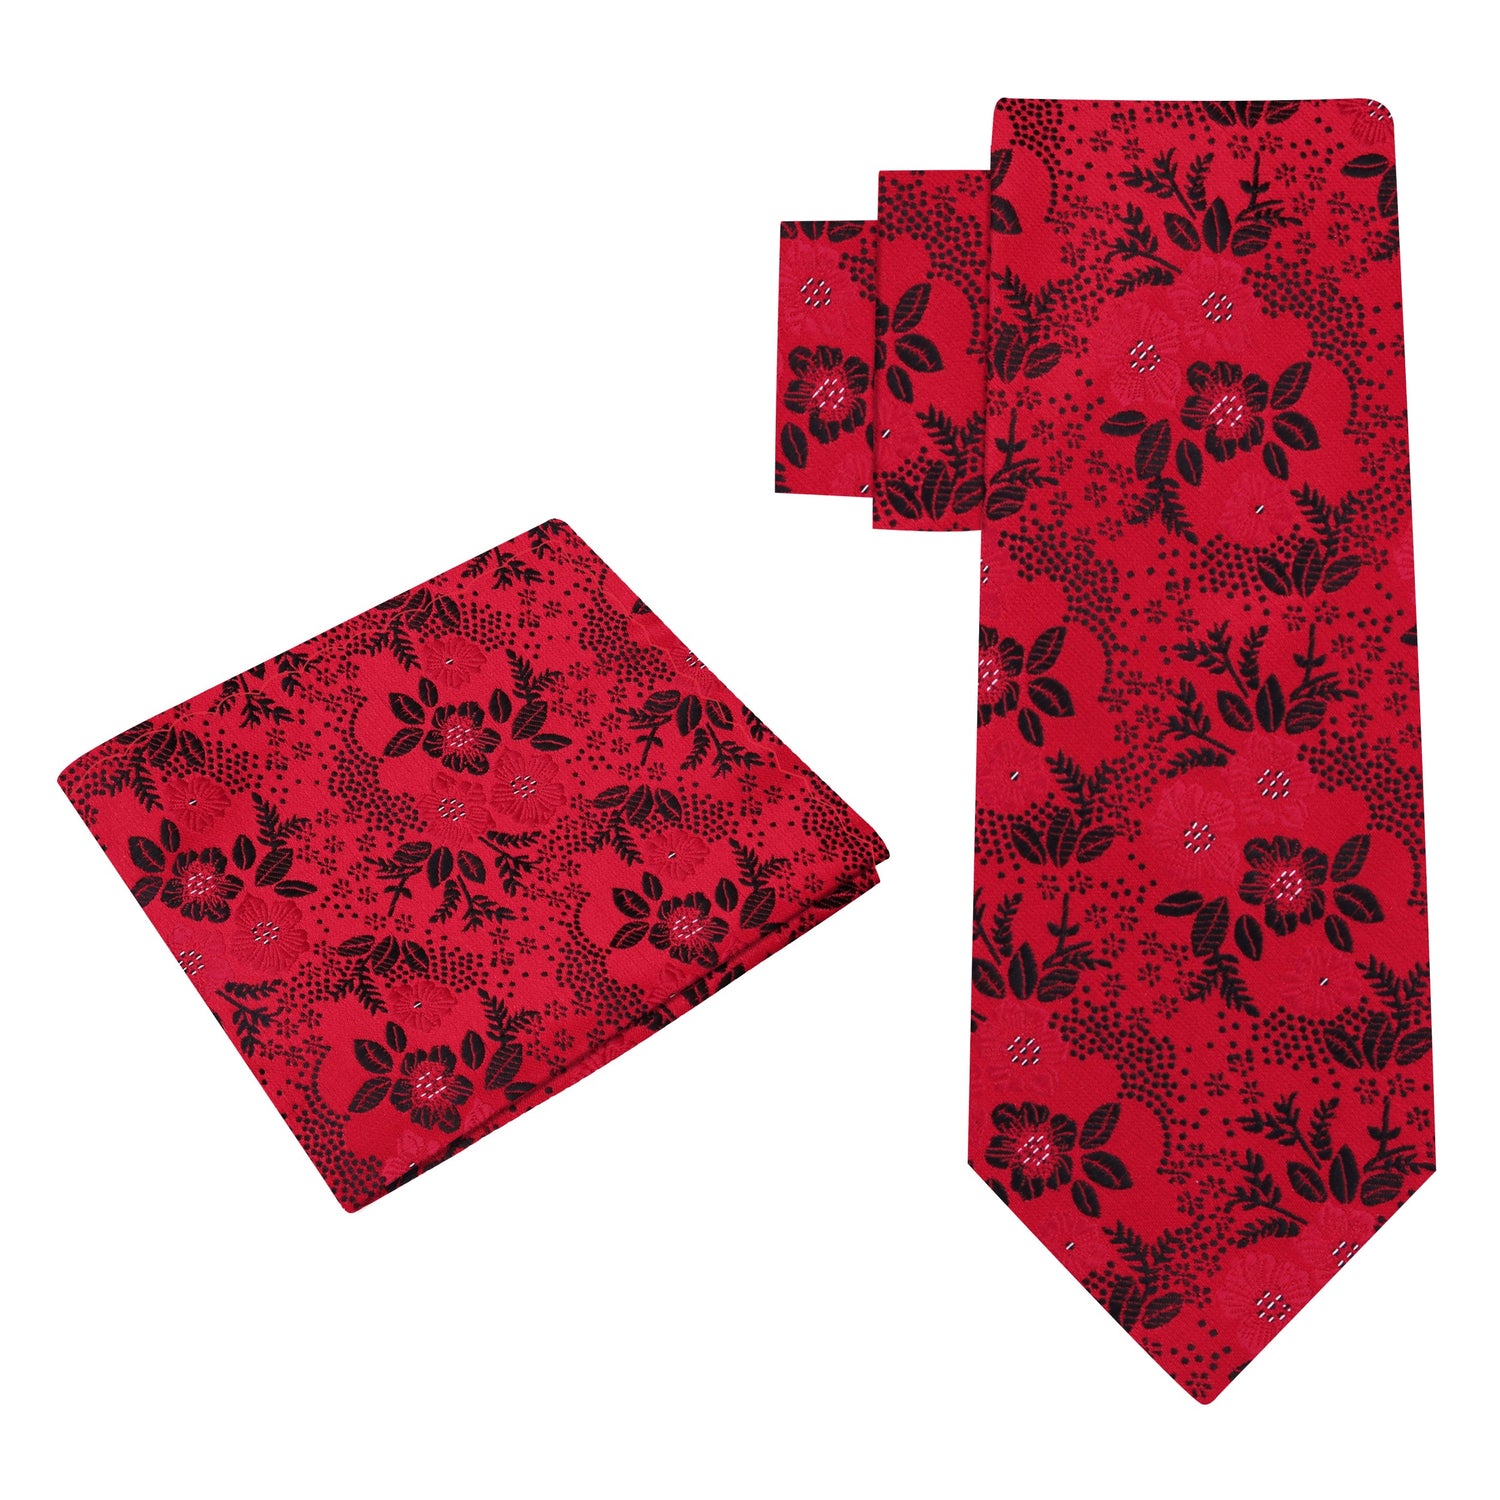 Alt View: A Red With Black Floral Pattern Necktie With Matching Pocket Square